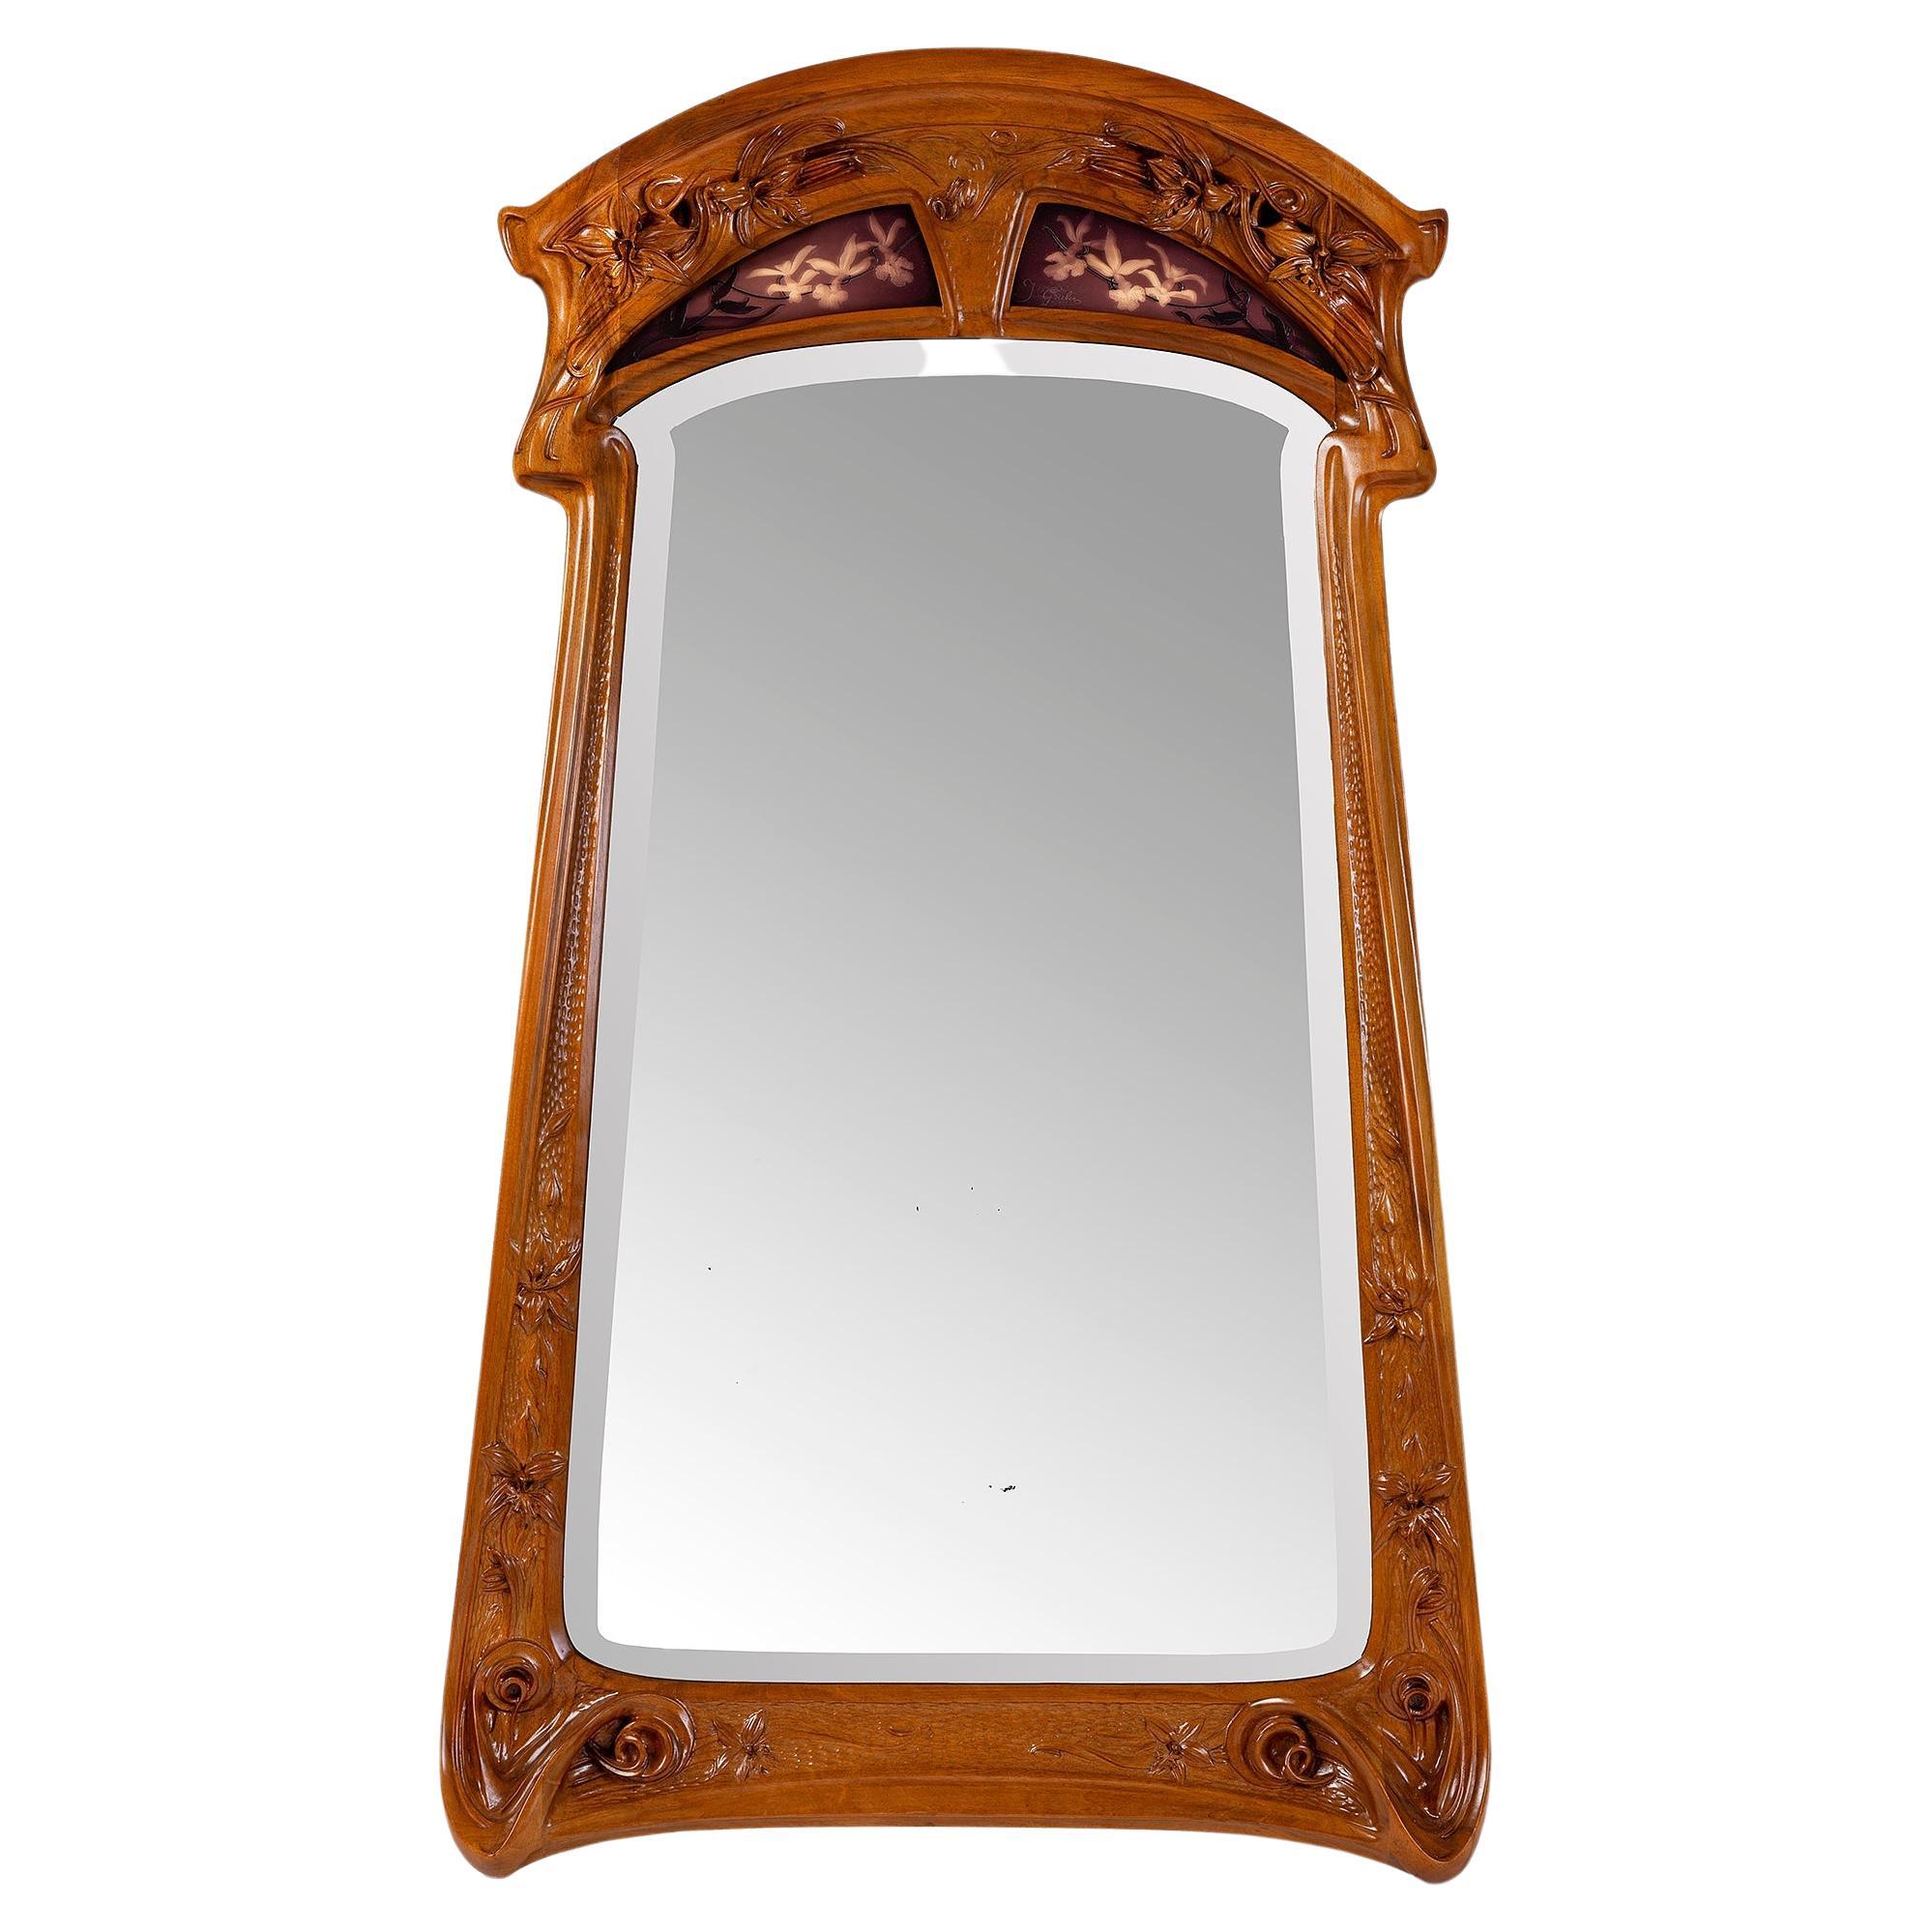 Jacques Gruber "Aux Orchidée" Mirror For Sale at 1stDibs